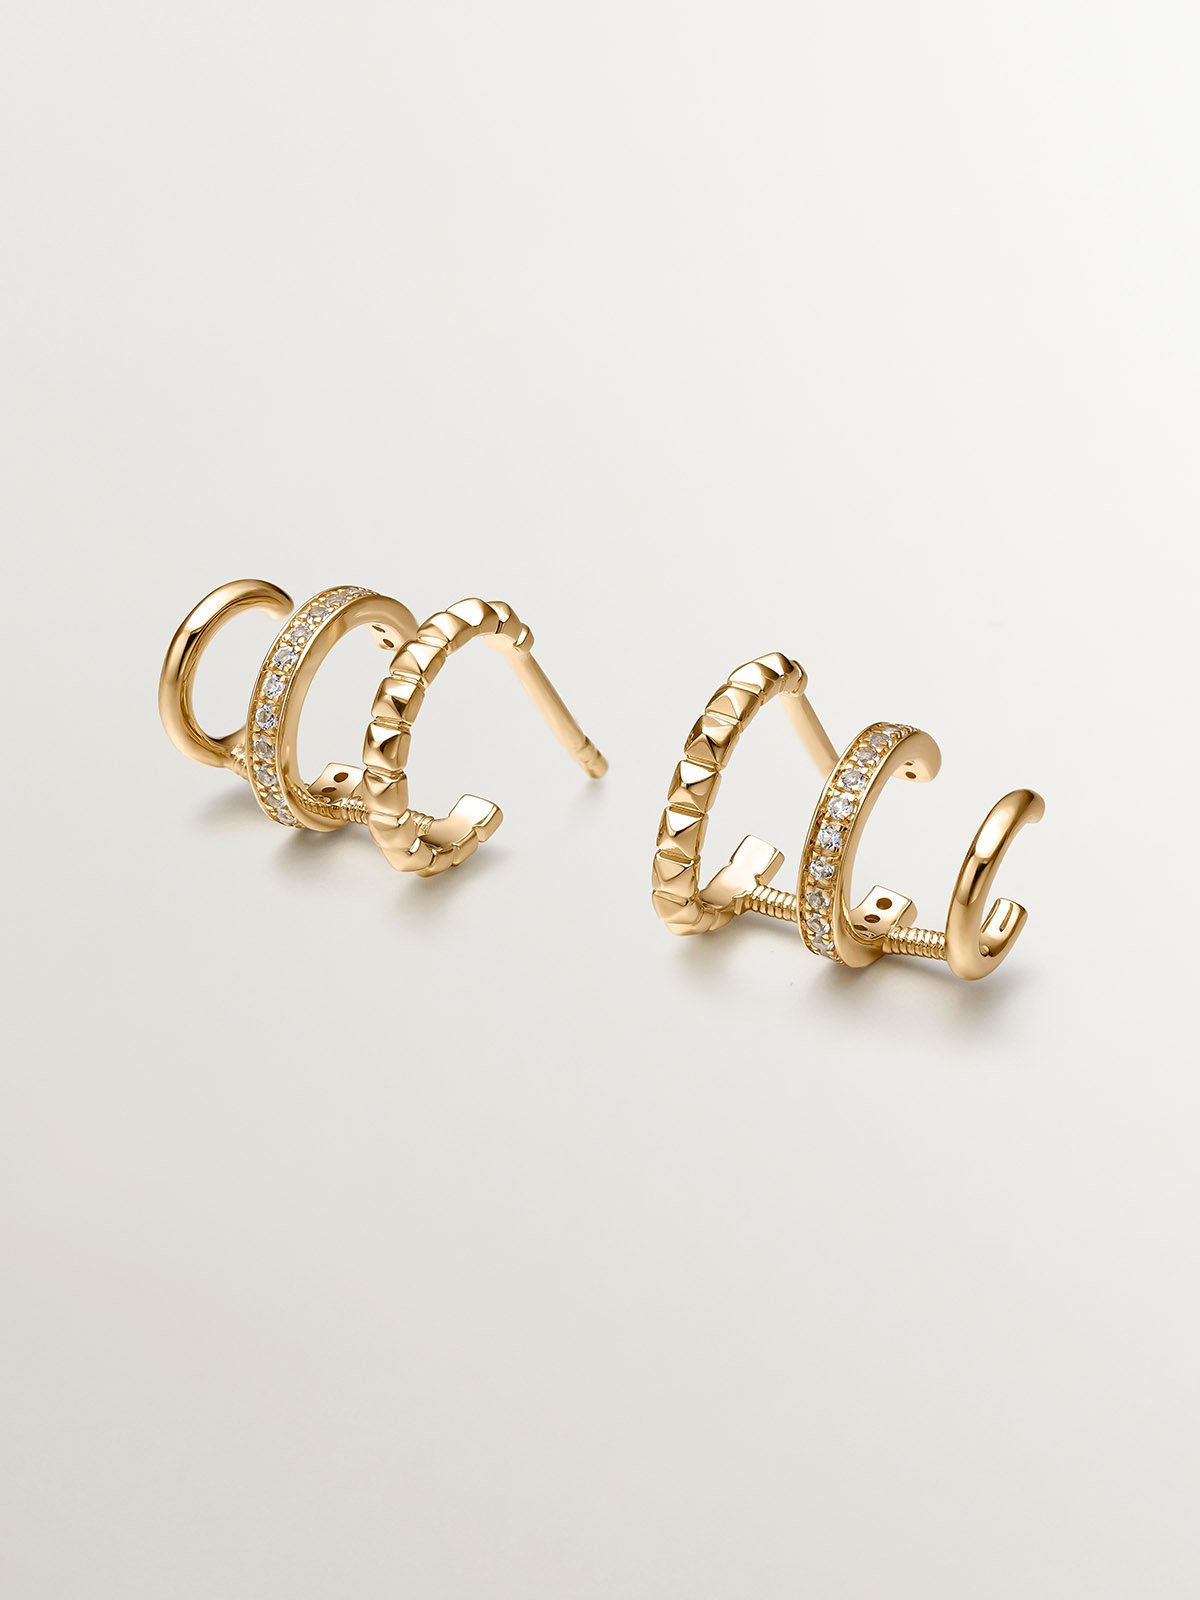 925 Silver Climber Earrings bathed in 18K Yellow Gold with White Topaz.